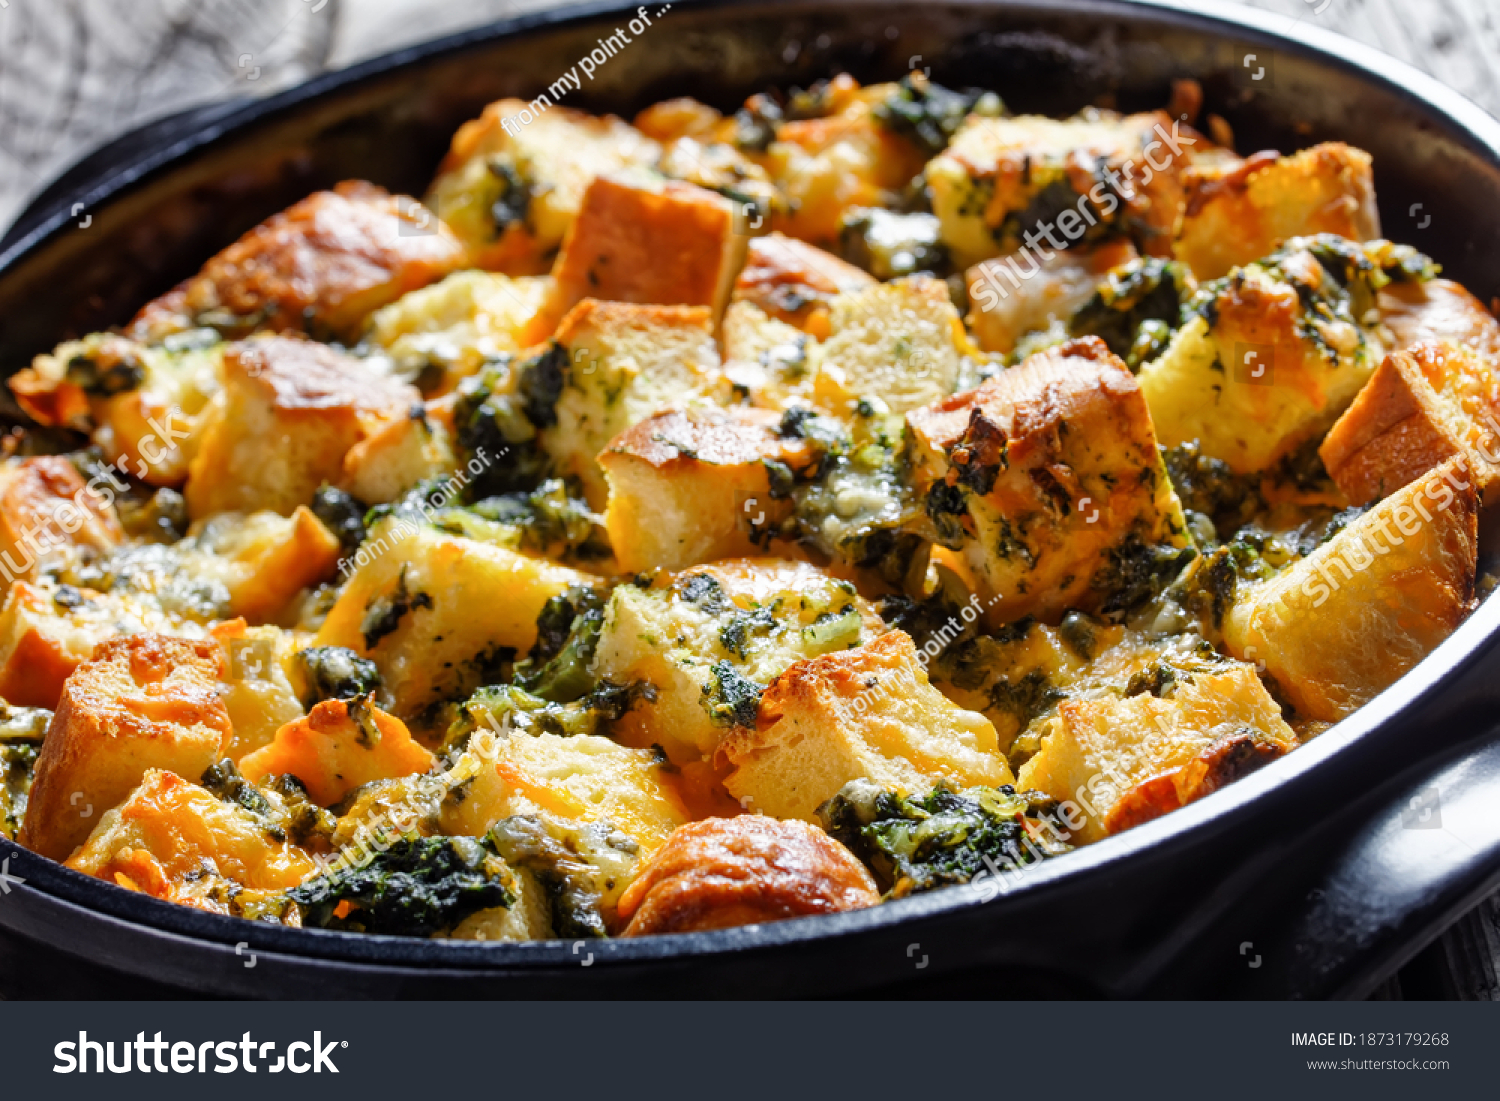 Italian spinach strata of soaked overnight cubed sandwich bread and baked with chopped spinach and shredded cheese with mustard served on a black baking dish on a wooden background, top view #1873179268